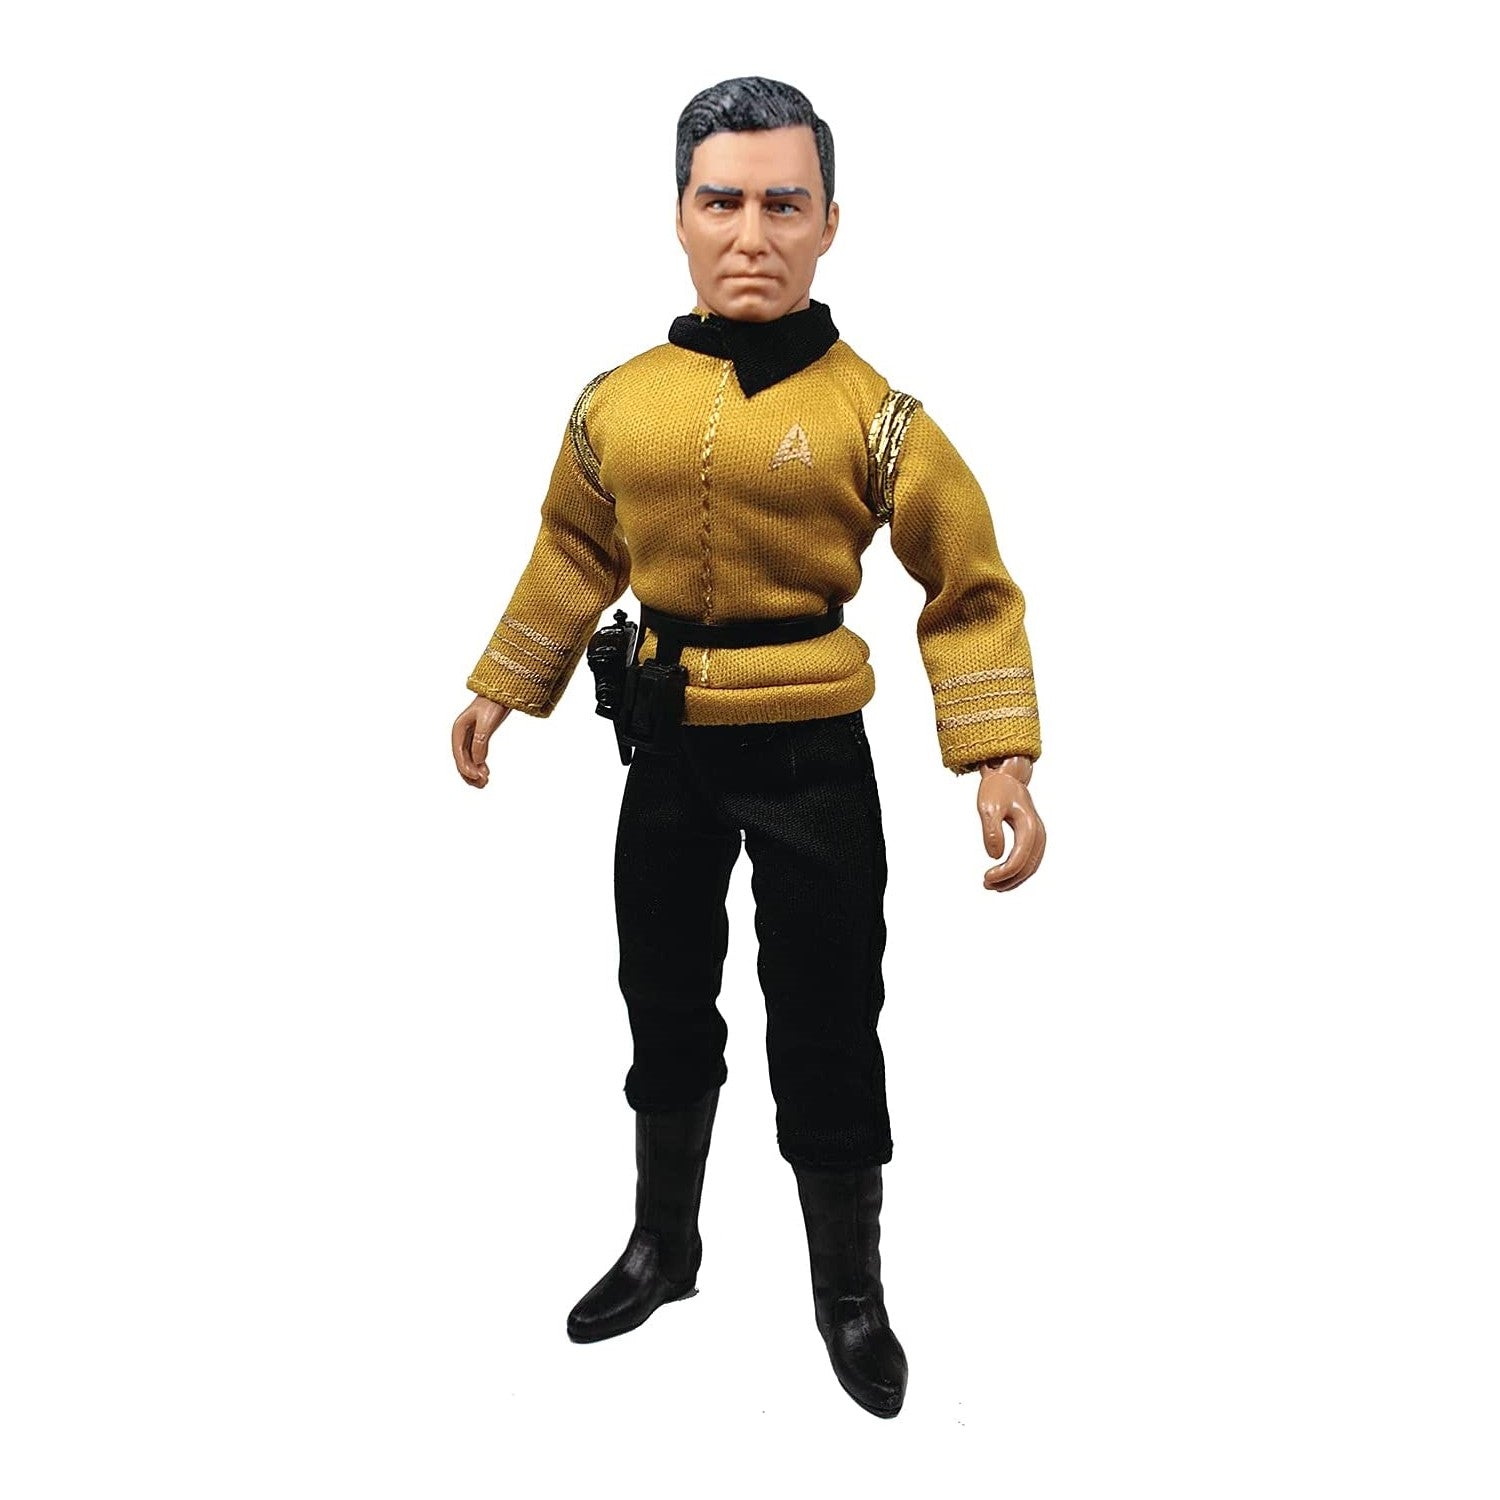 Star Trek Discovery Captain Pike 8" Action Figure - Mego - 0